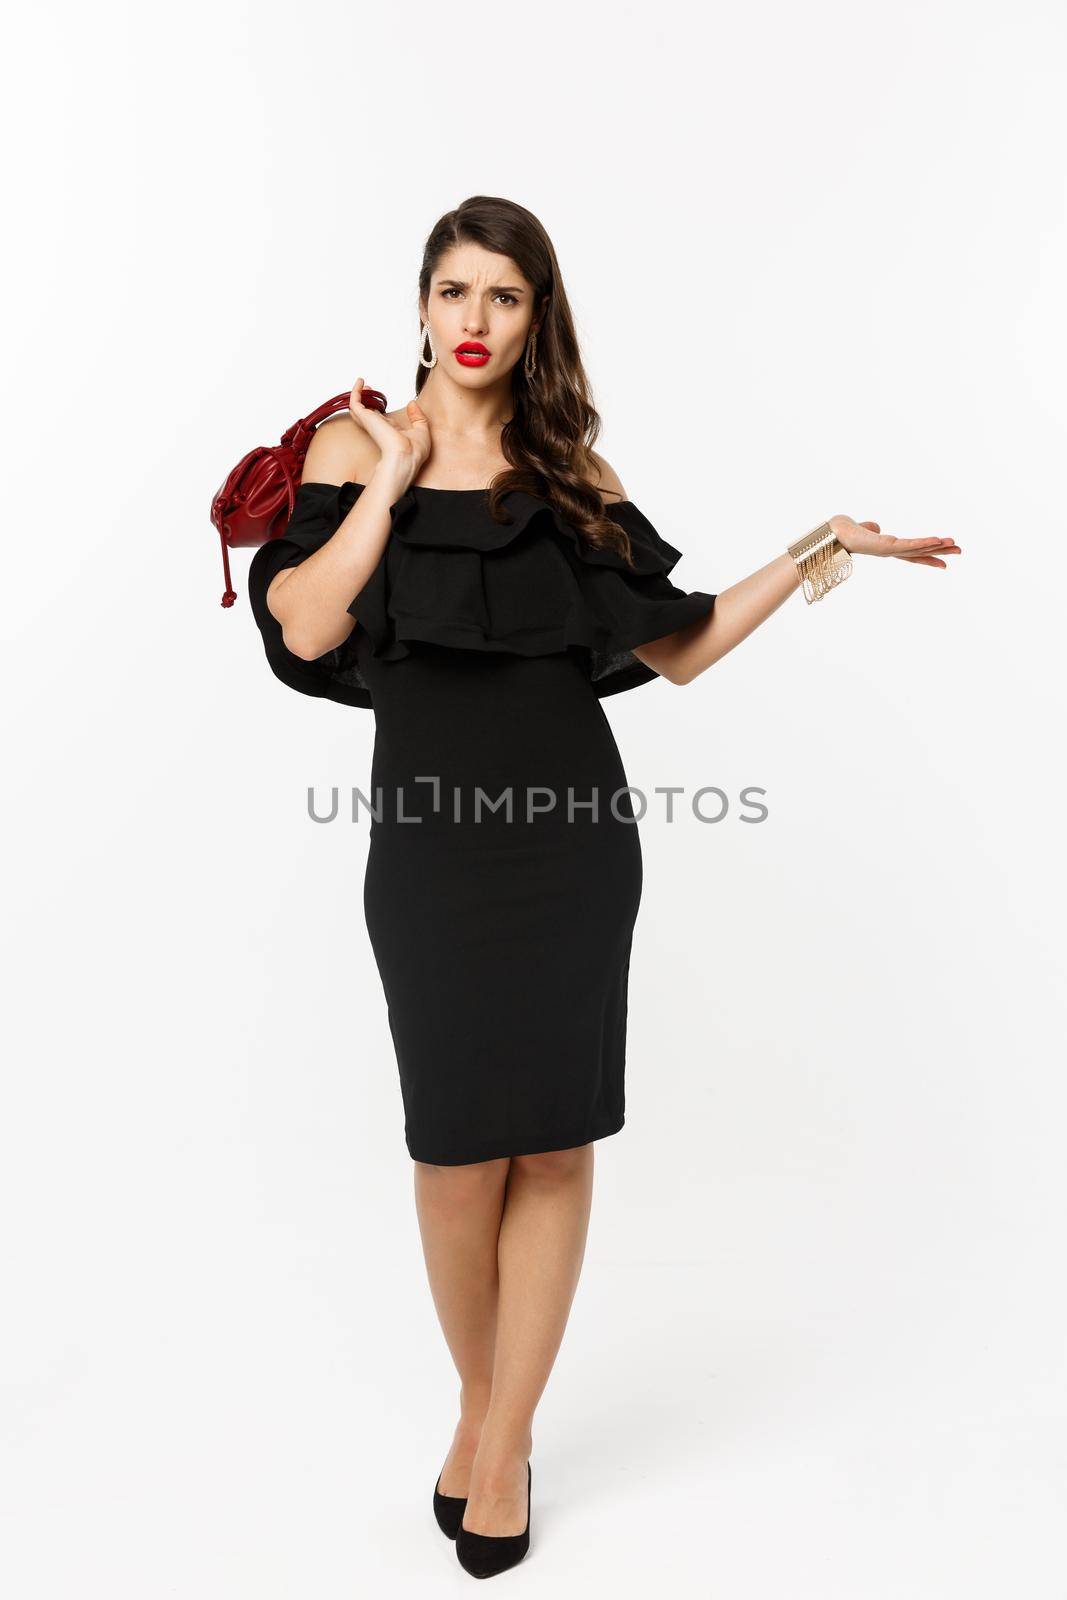 Beauty and fashion concept. Full length of arrogant and sassy woman in black dress, holding purse on shoulder and stroll forward at camera, posing over white background.